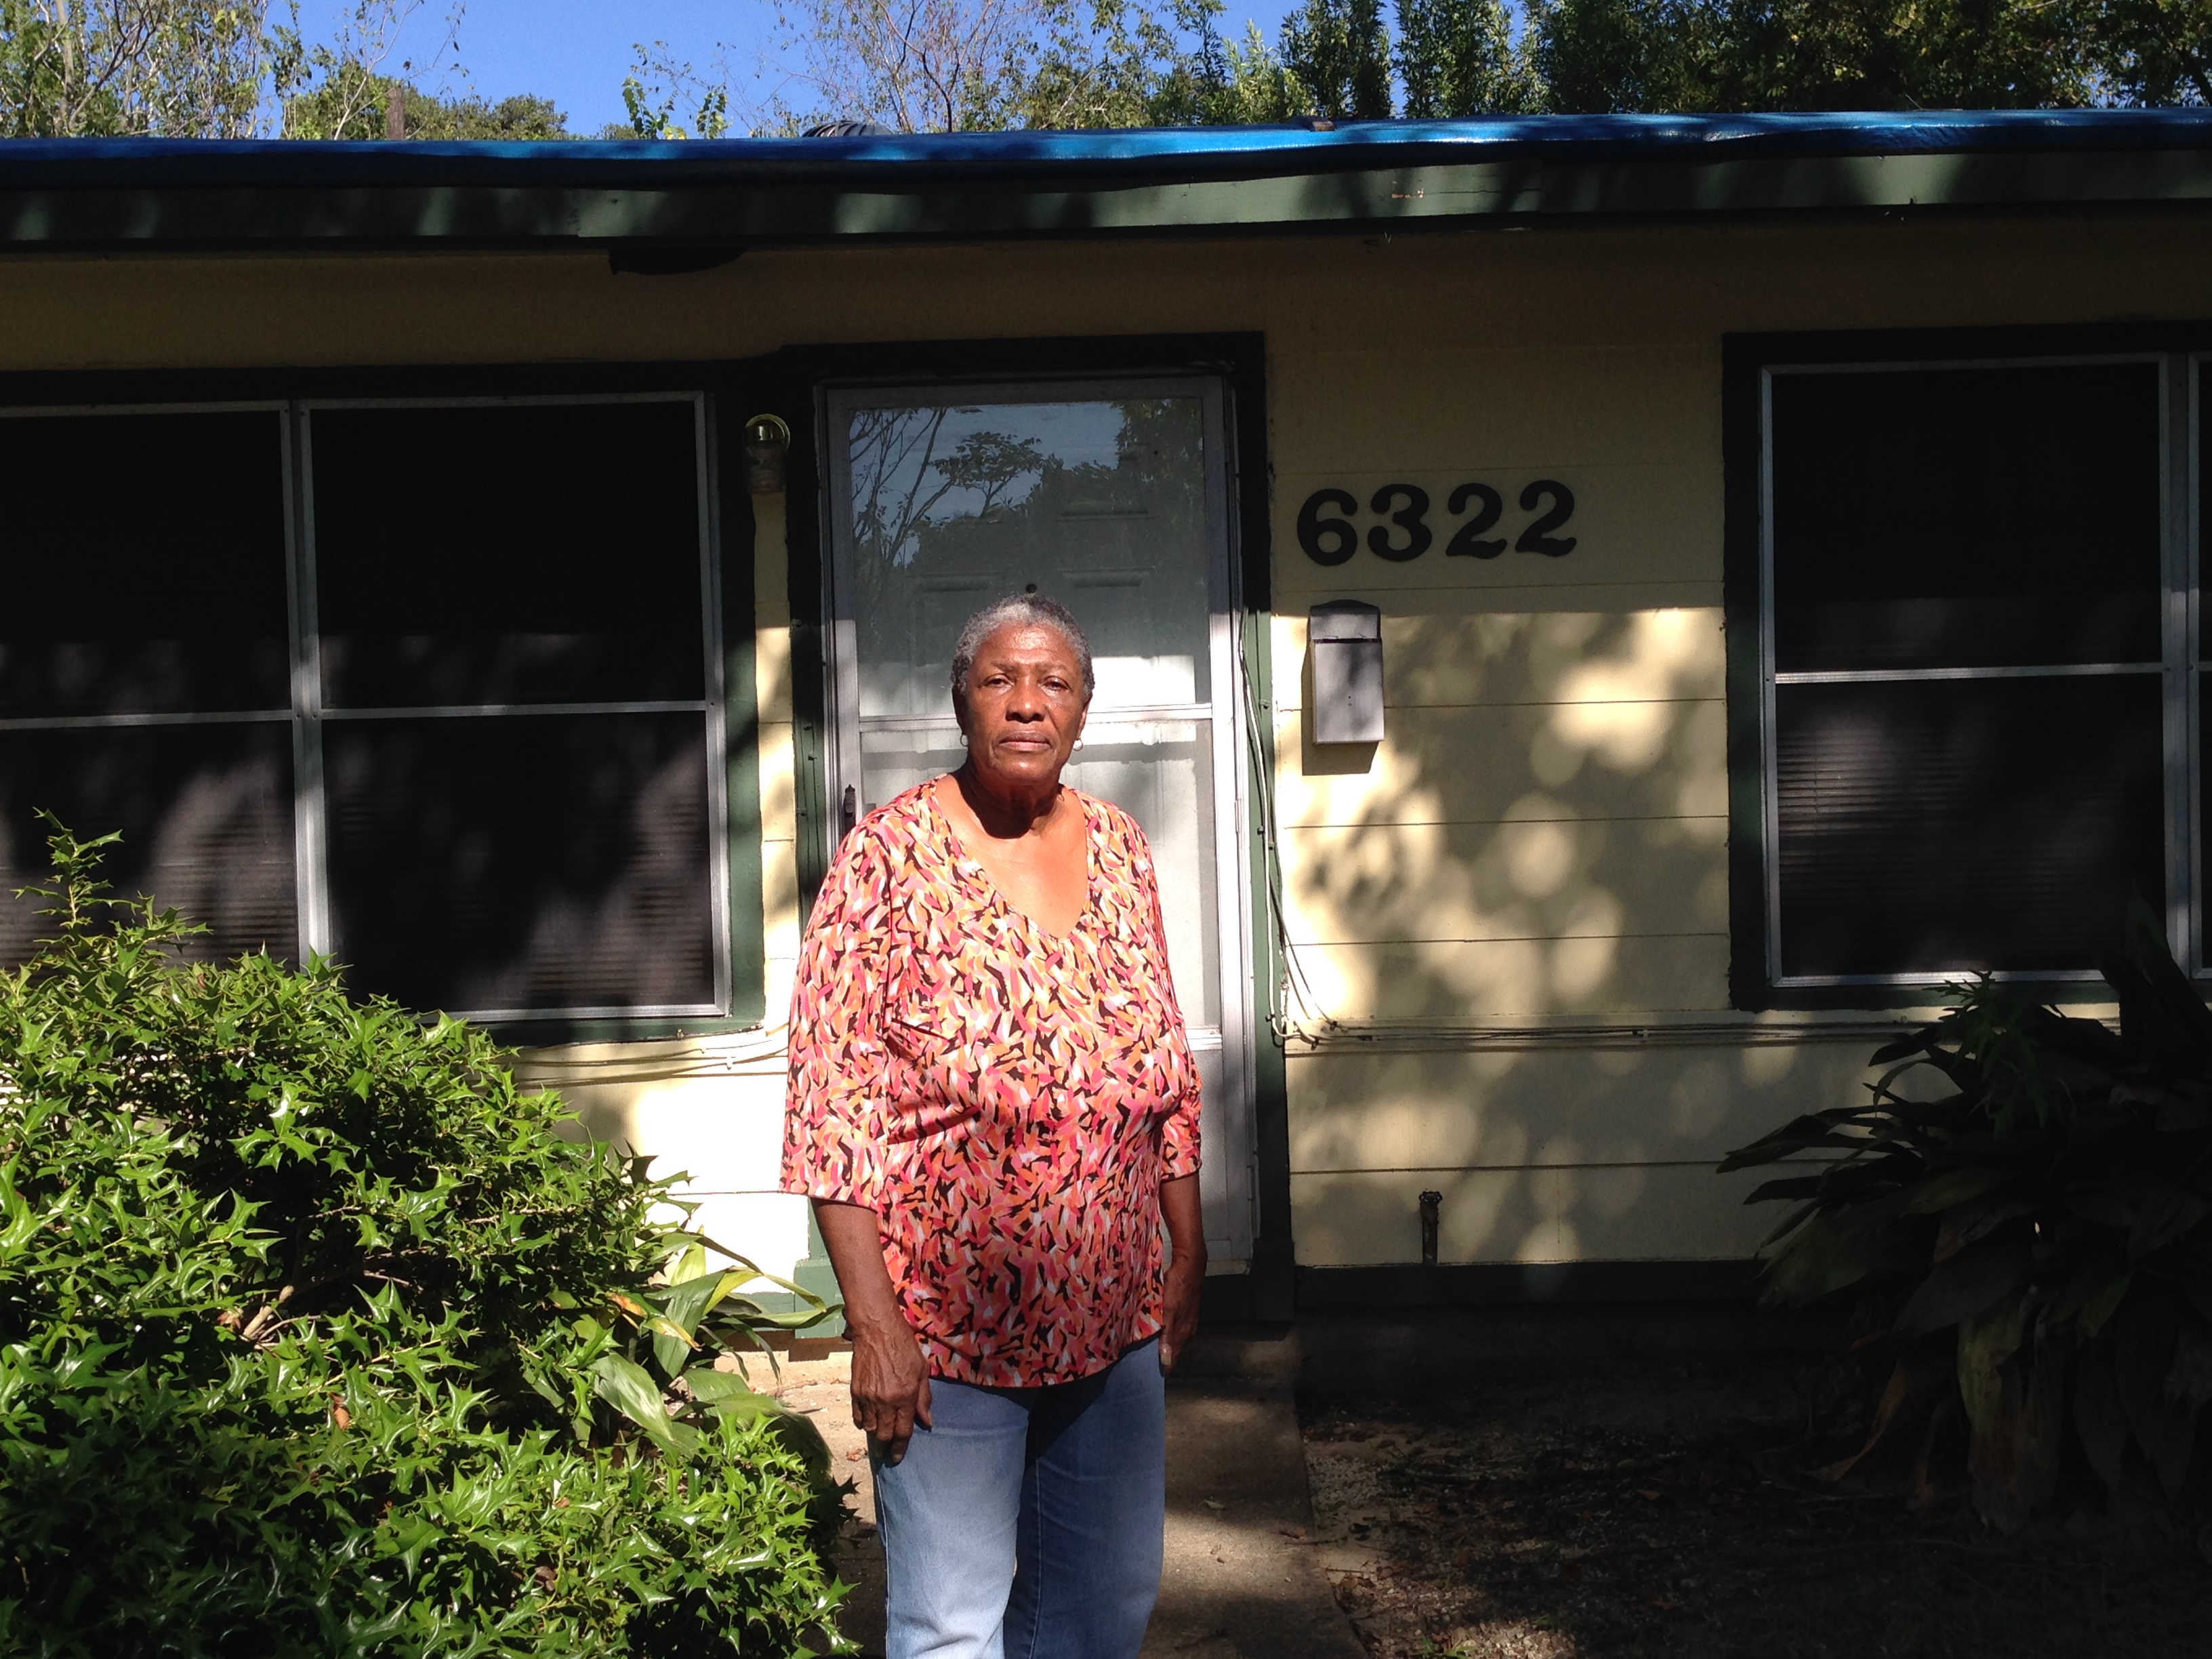 Vallia Huff, a retiree who lives in south Houston, lost her home's roof after hurricane Ike swept the region, back in 2008.